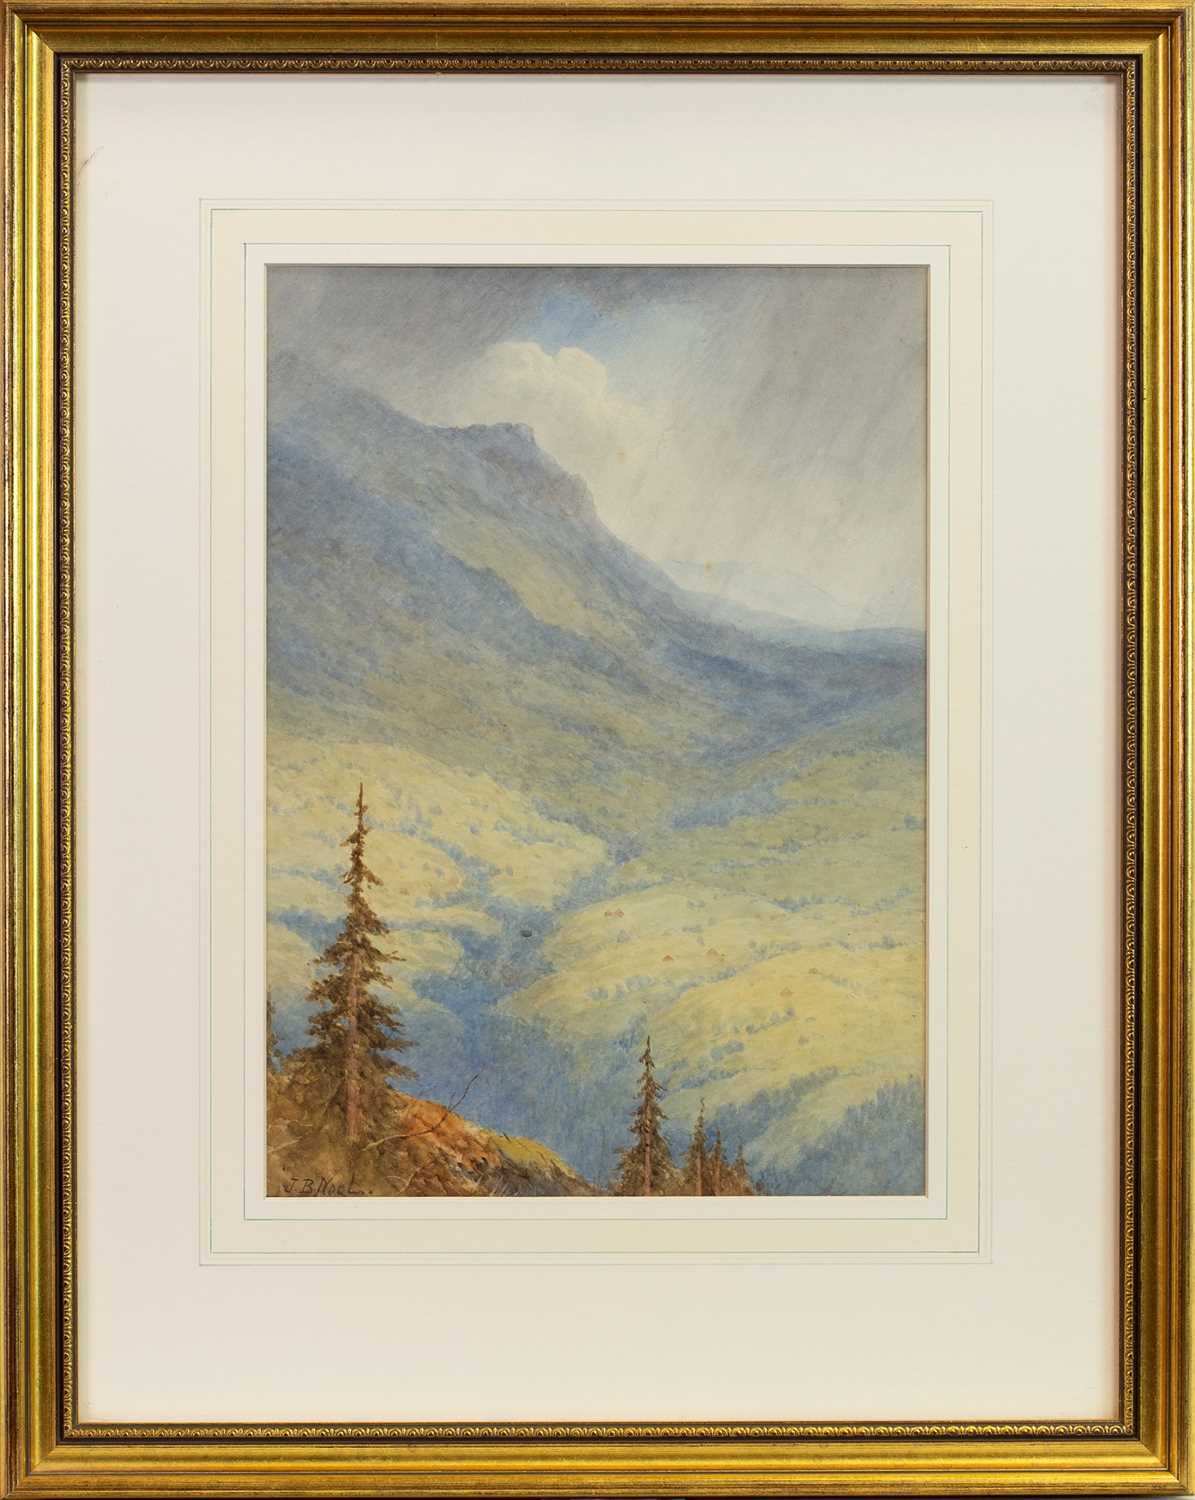 Lot 444 - STORM ON THE SHEINDIGG GRINDEWALD, A WATERCOLOUR BY JOHN BATES NOEL